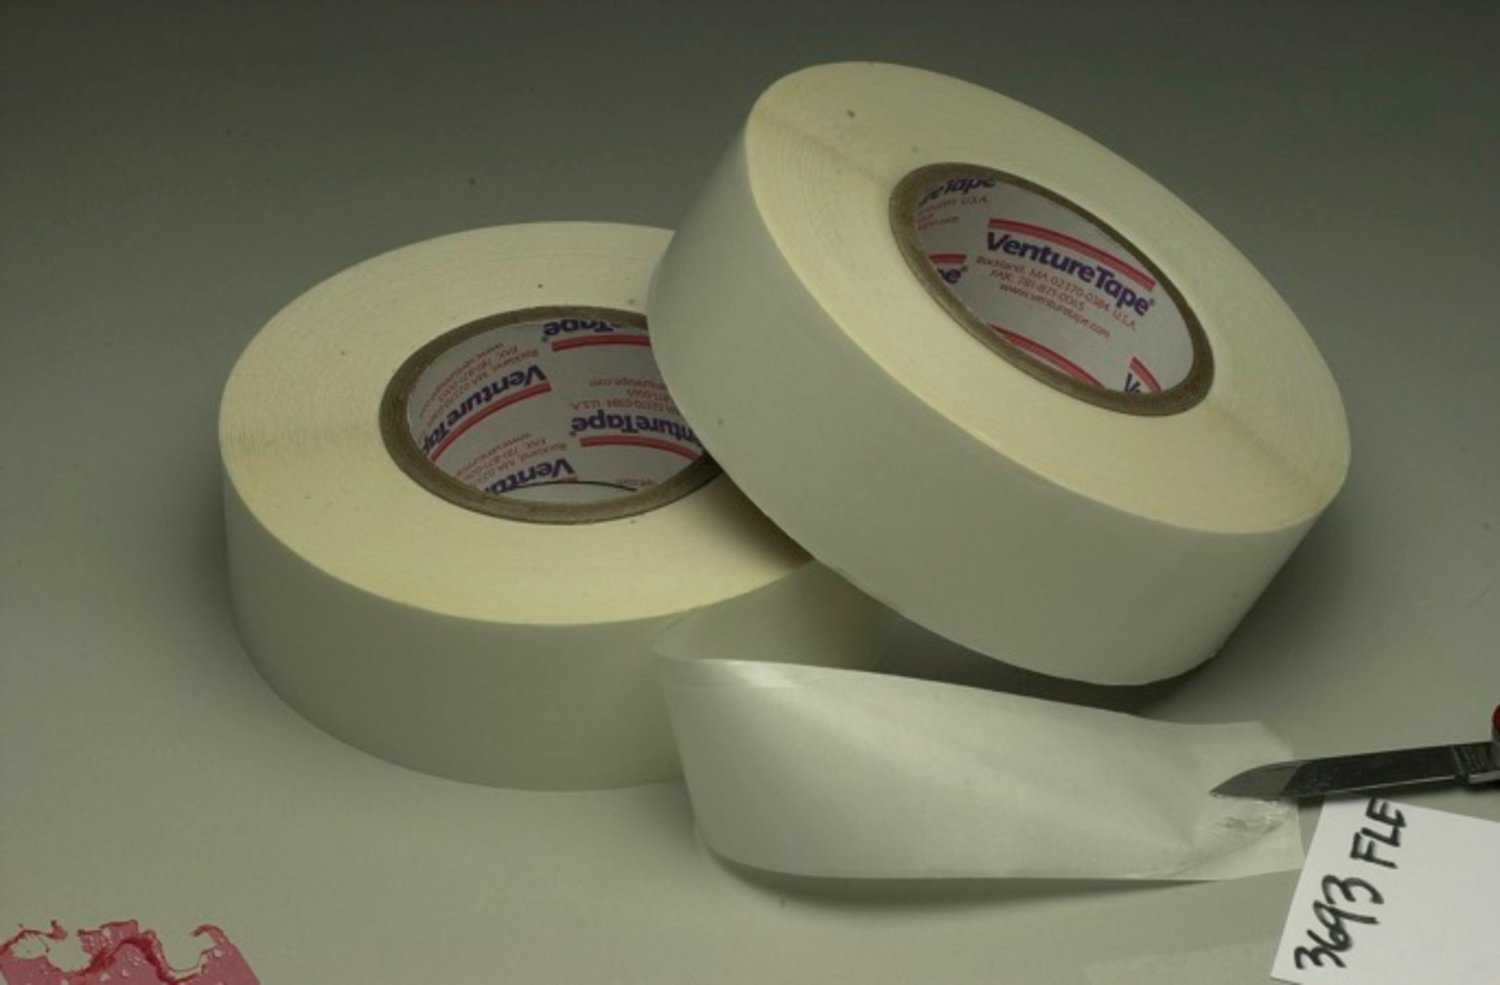 7100043756 - 3M Venture Tape Double Coated Nylon Tape 3693, 54 in x 250 yd, 1 Roll/Case